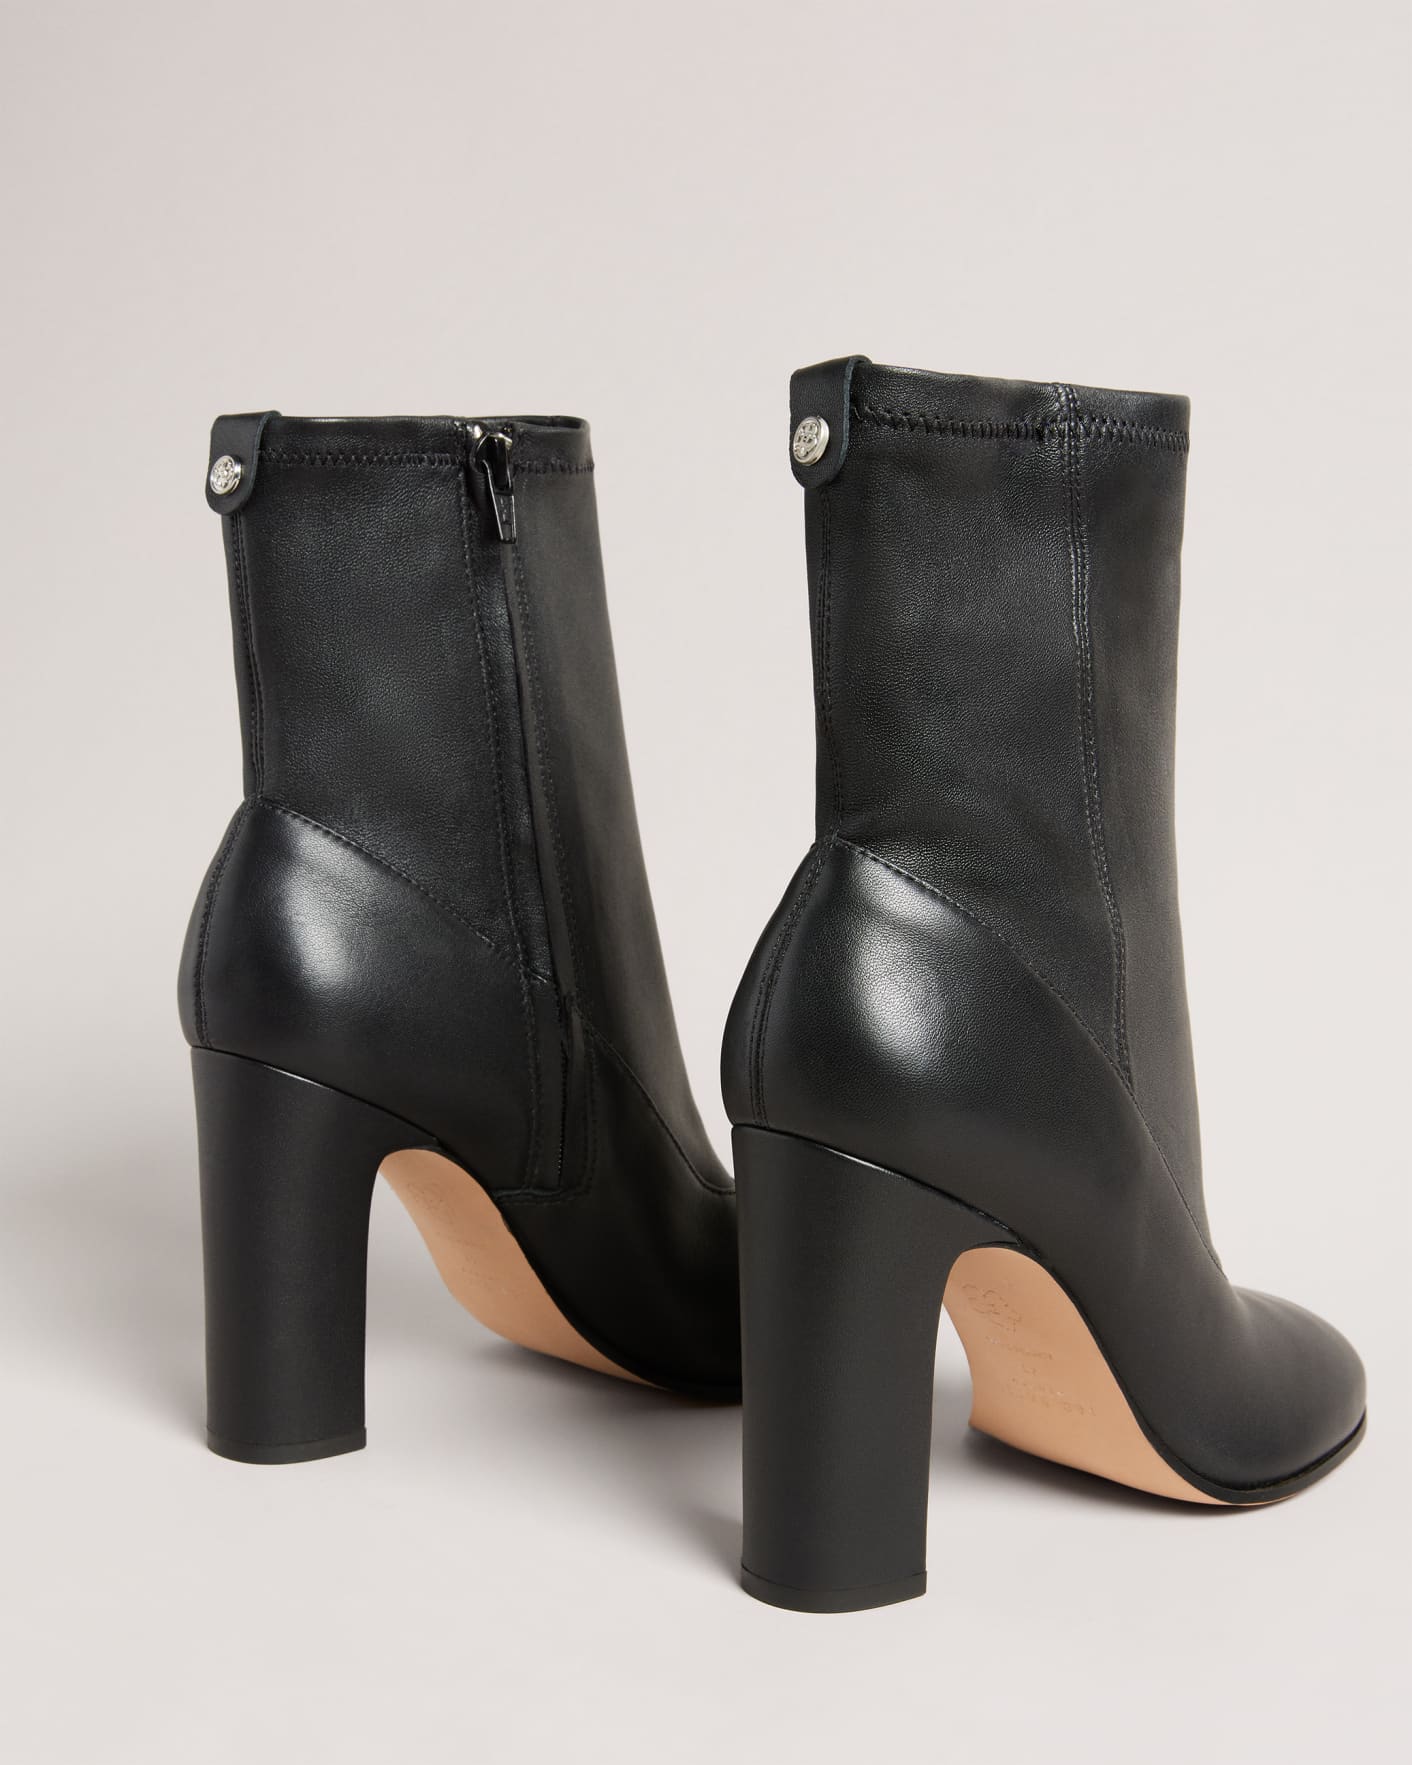 Ted Baker Womens Boots Sale | vlr.eng.br